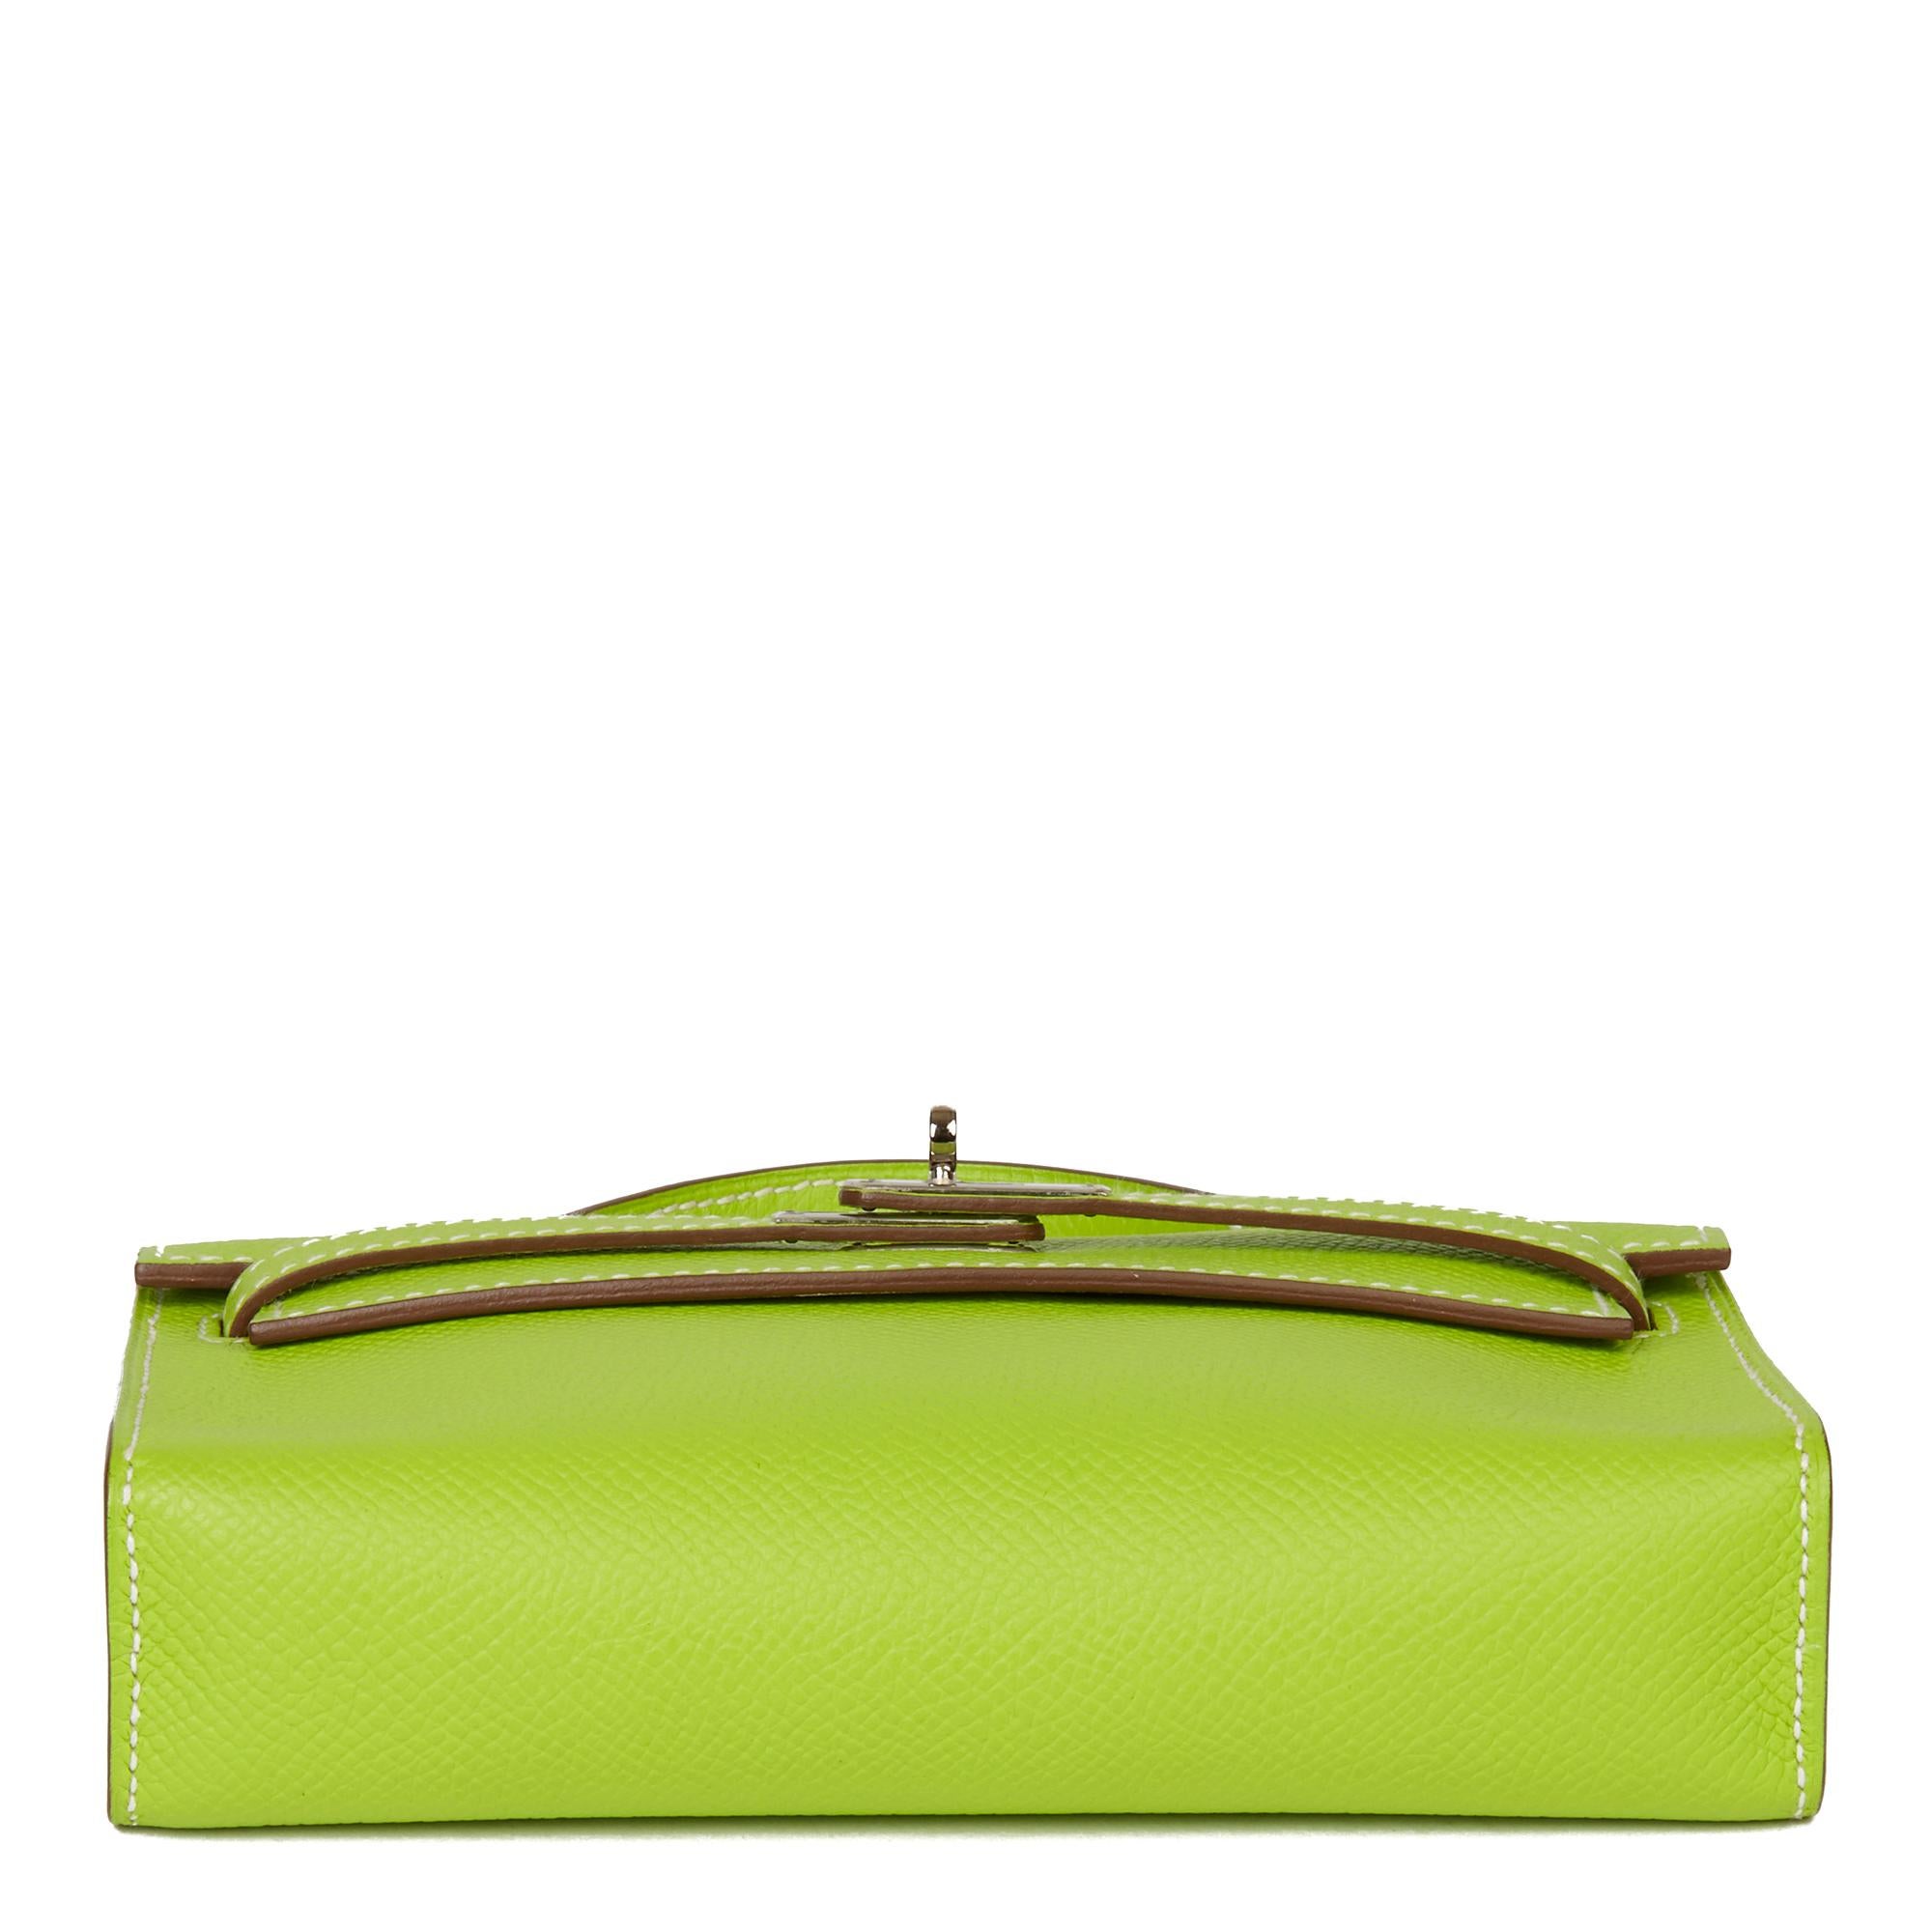 Green 2011 Hermès Kiwi Epsom Leather Candy Collection Kelly Tiny